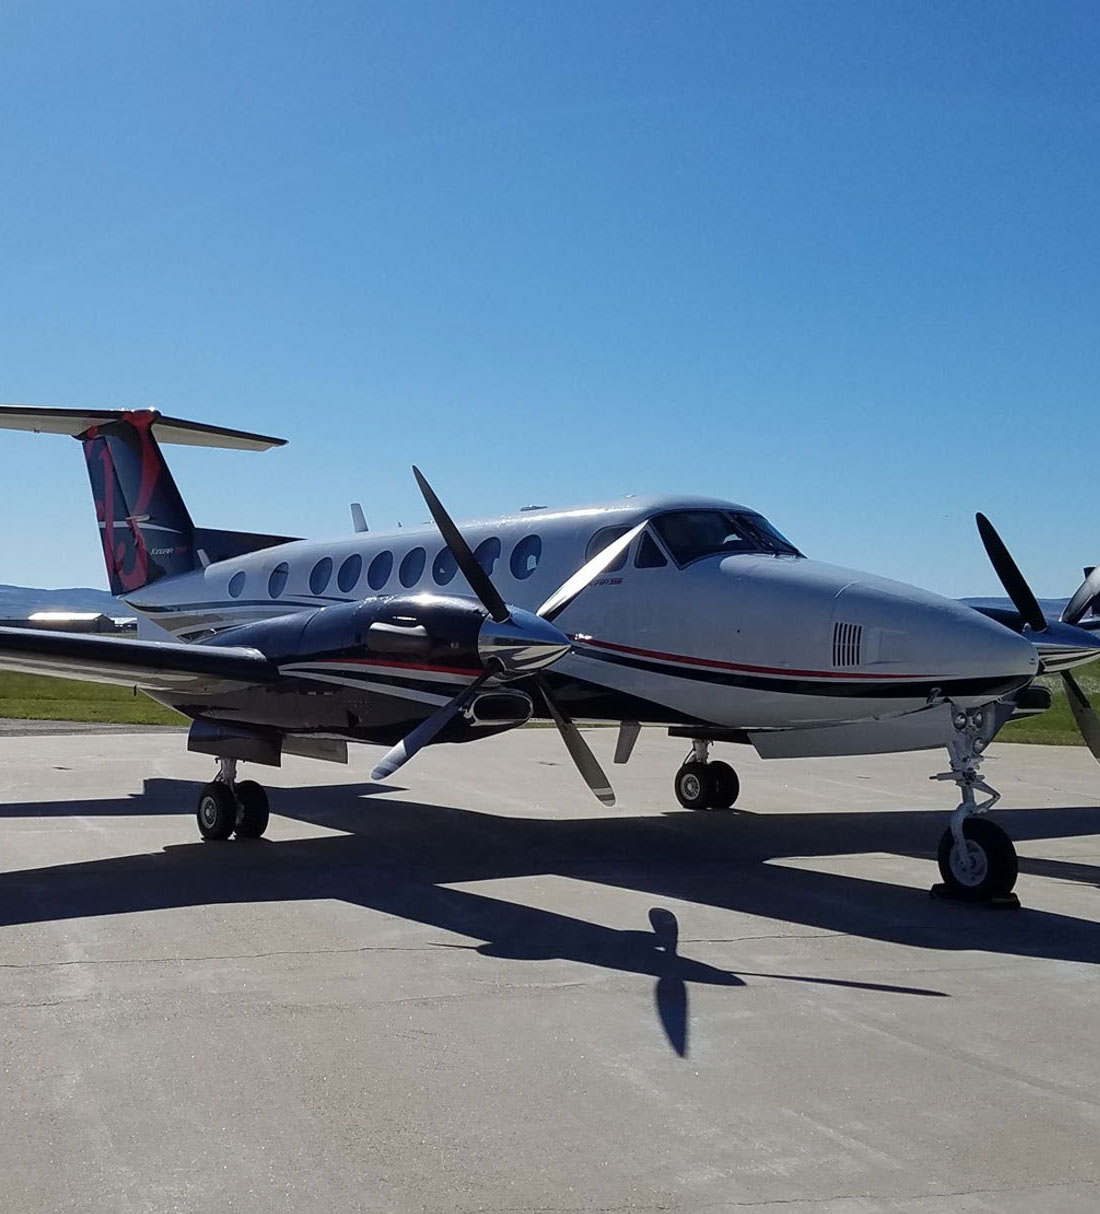 The next-generation King Air 350 as initially purchased by the university